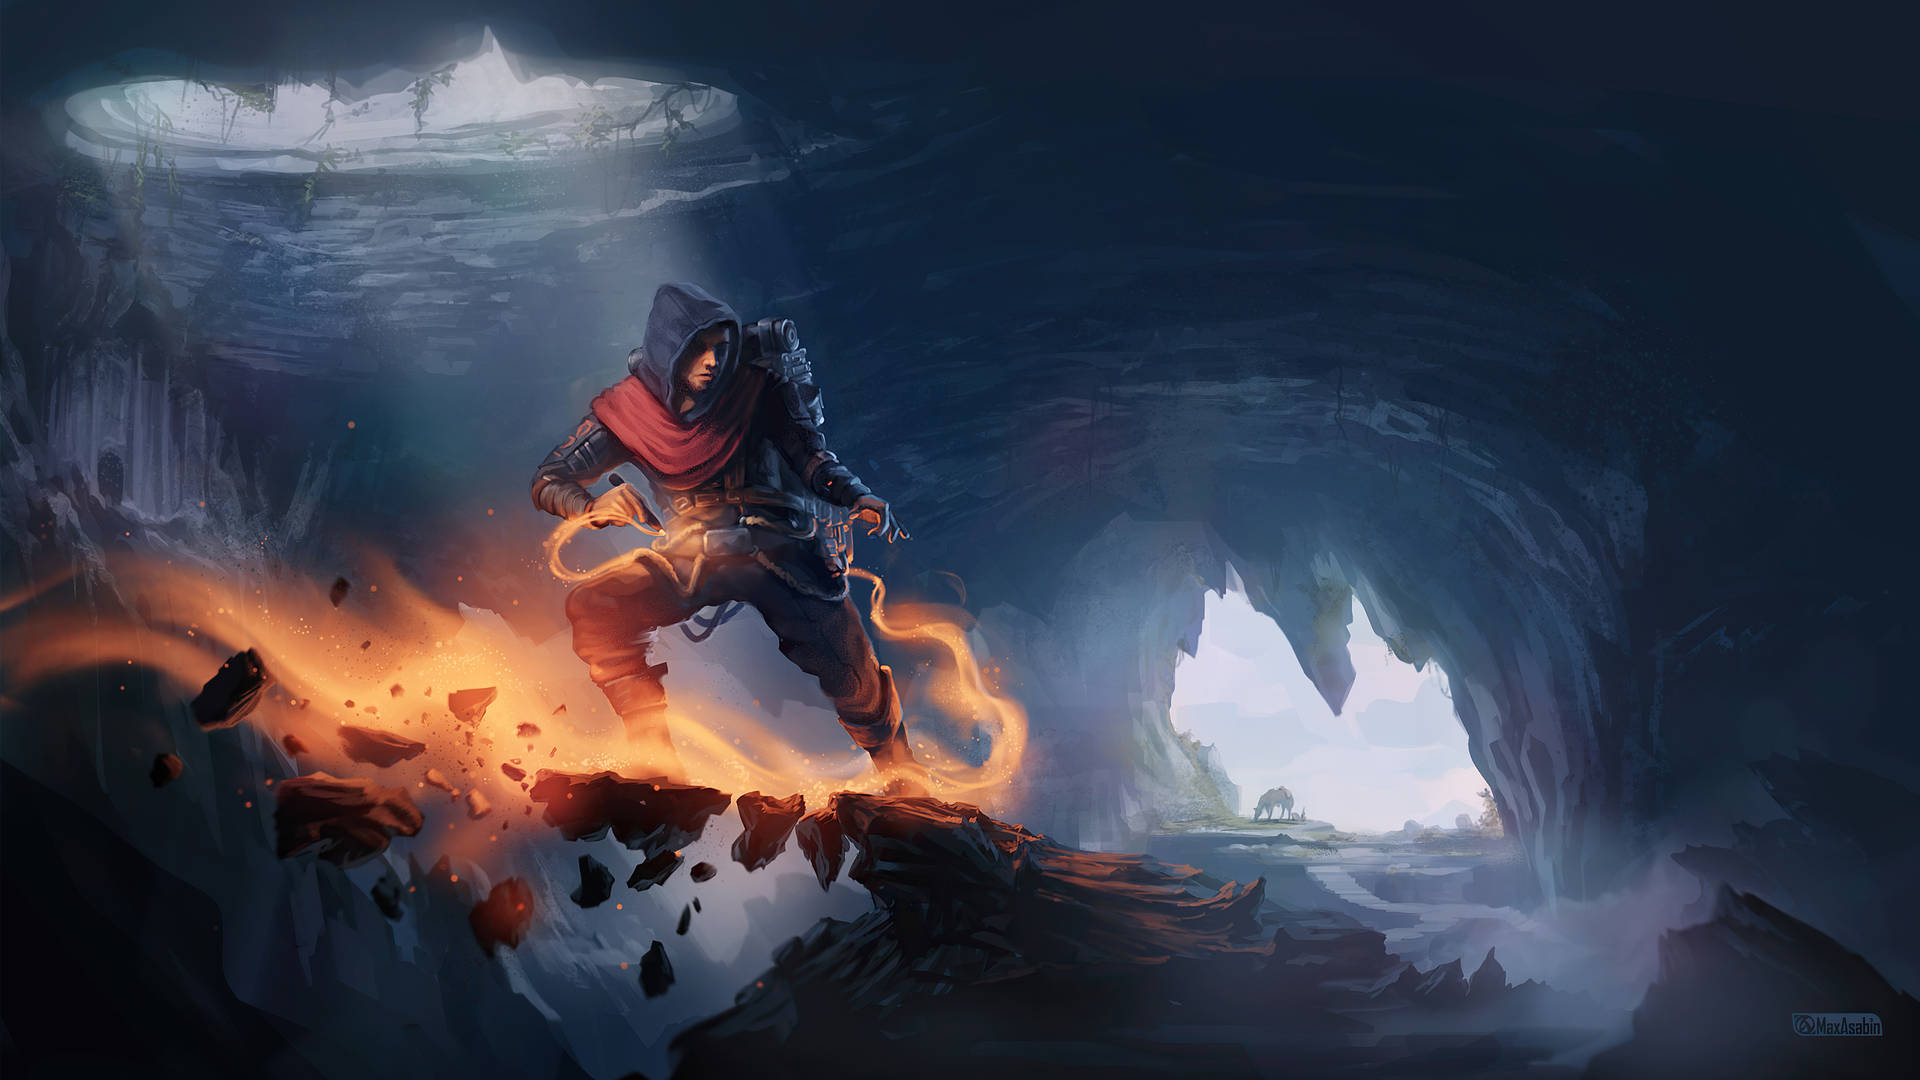 A Man Standing In A Cave With Fire Wallpaper